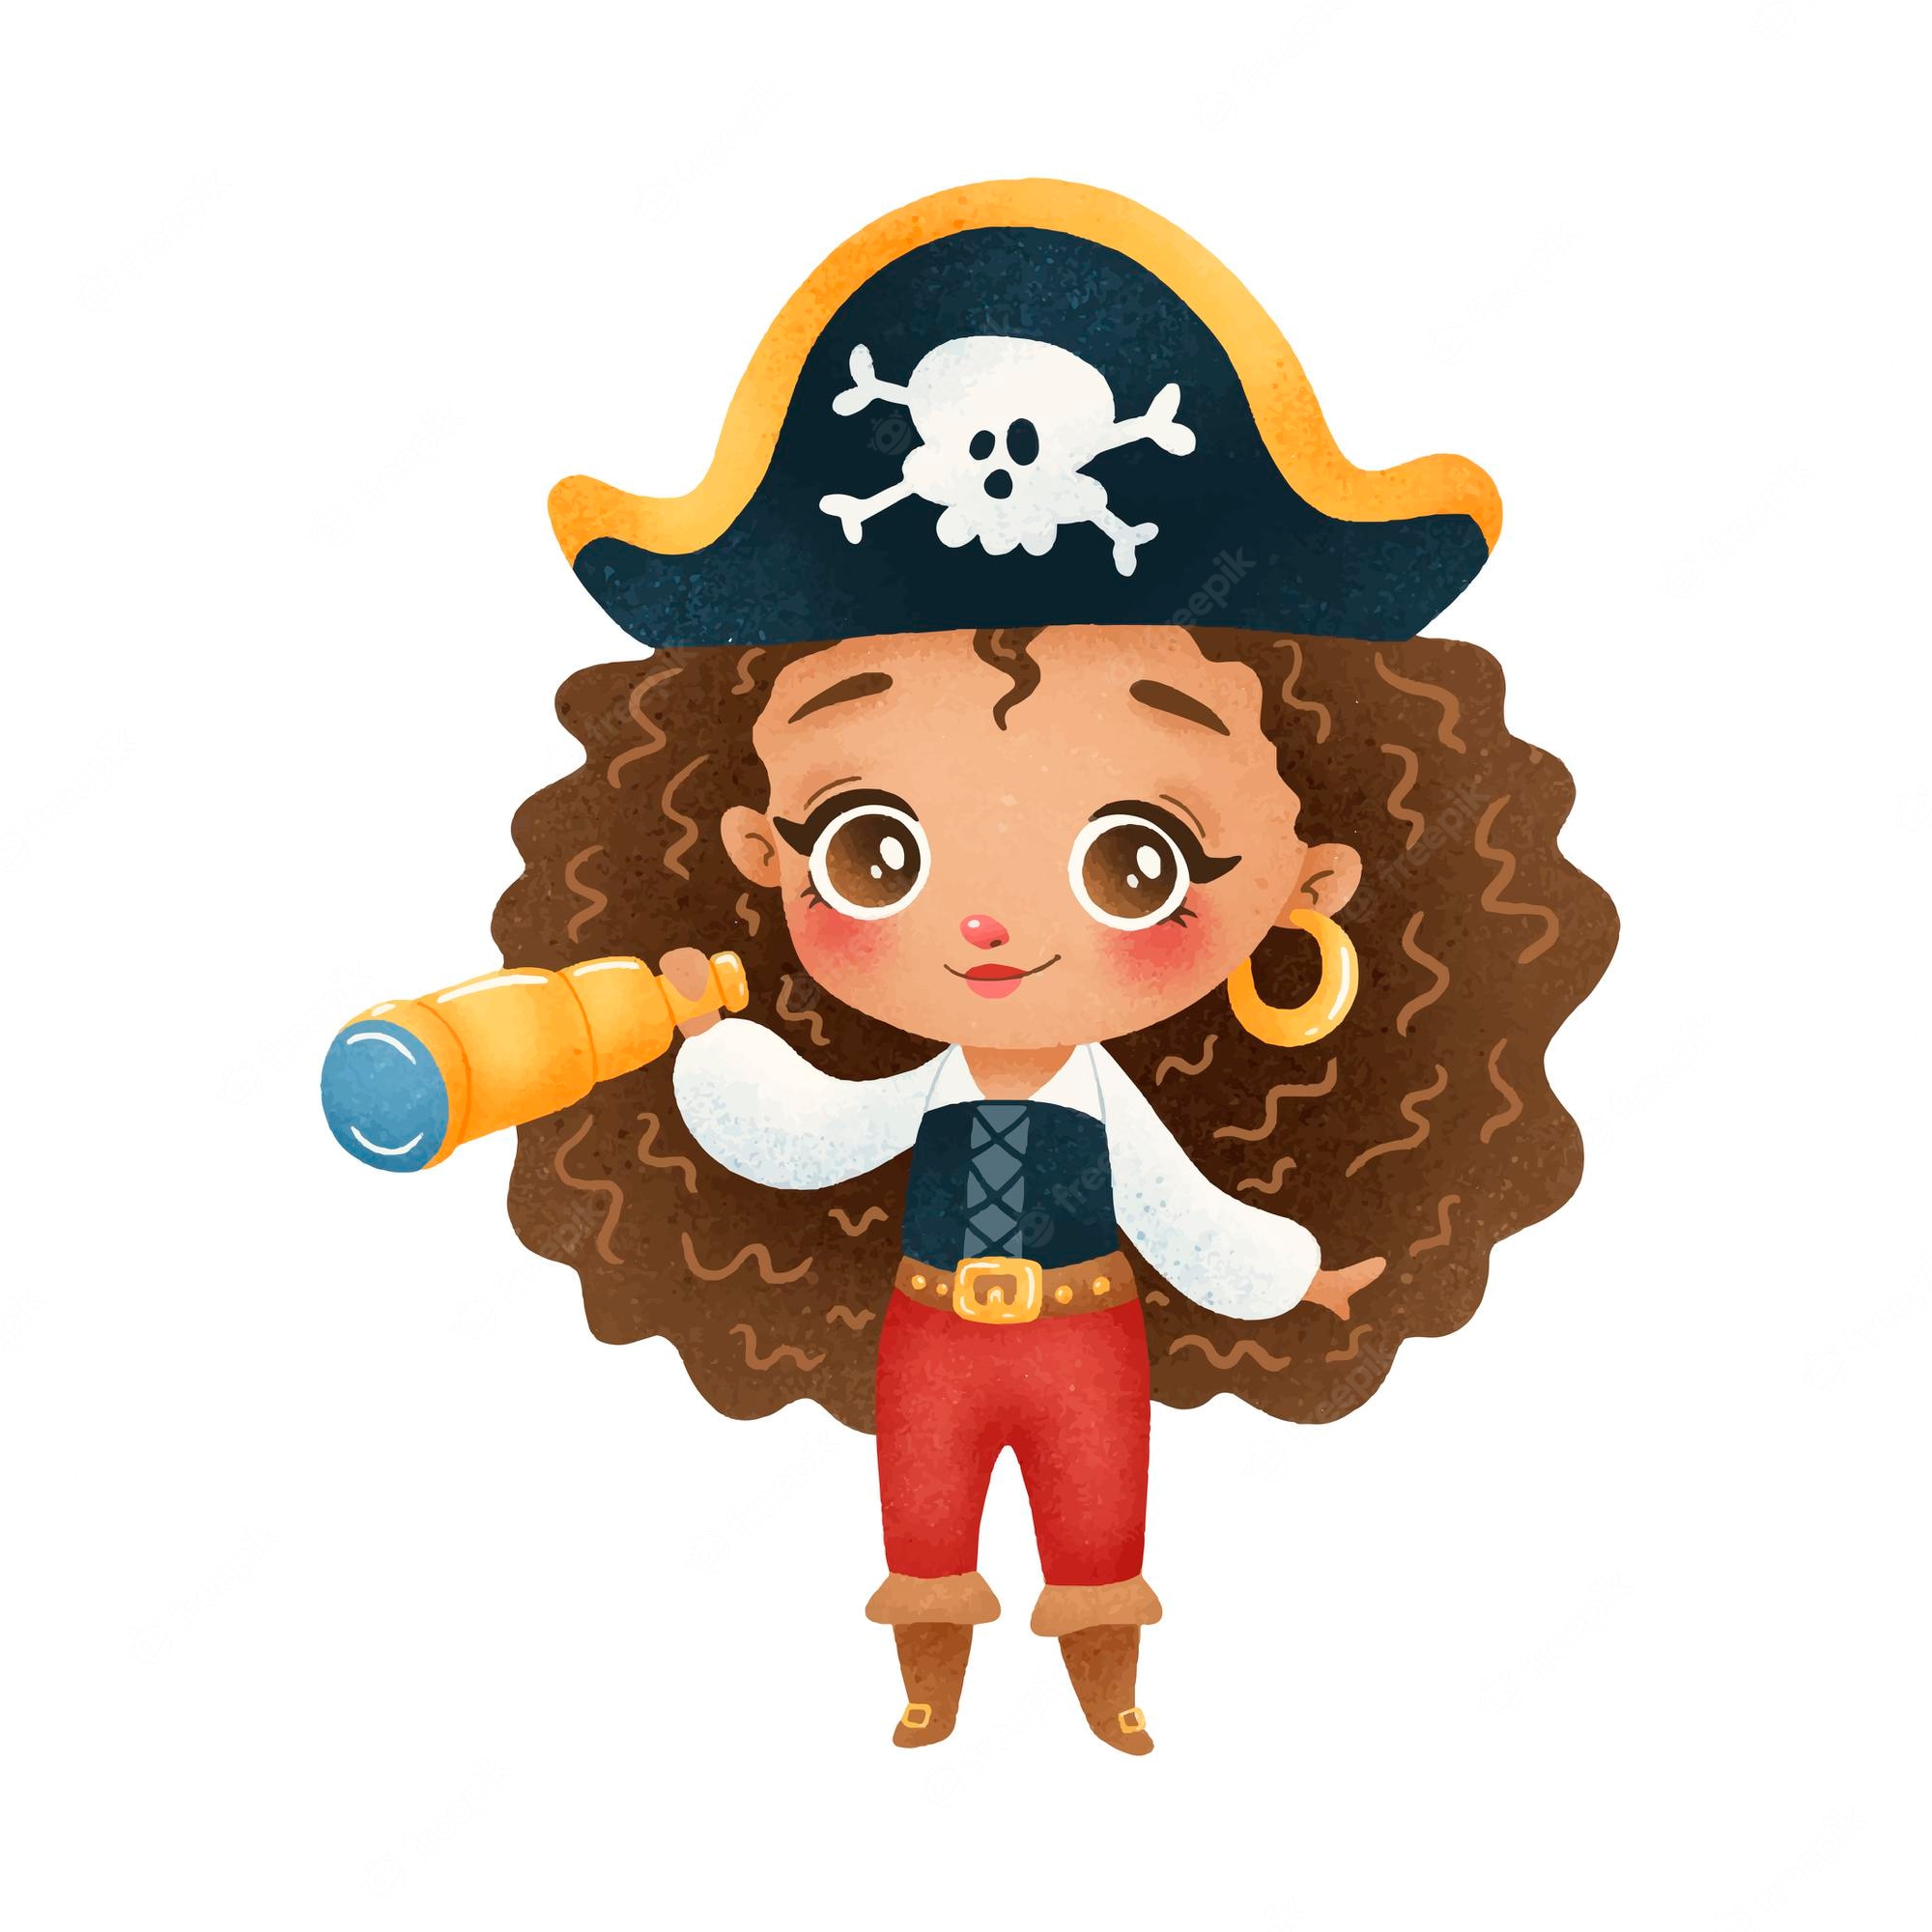 Pirate Clip Art - Pirate Images - Clip Art Library